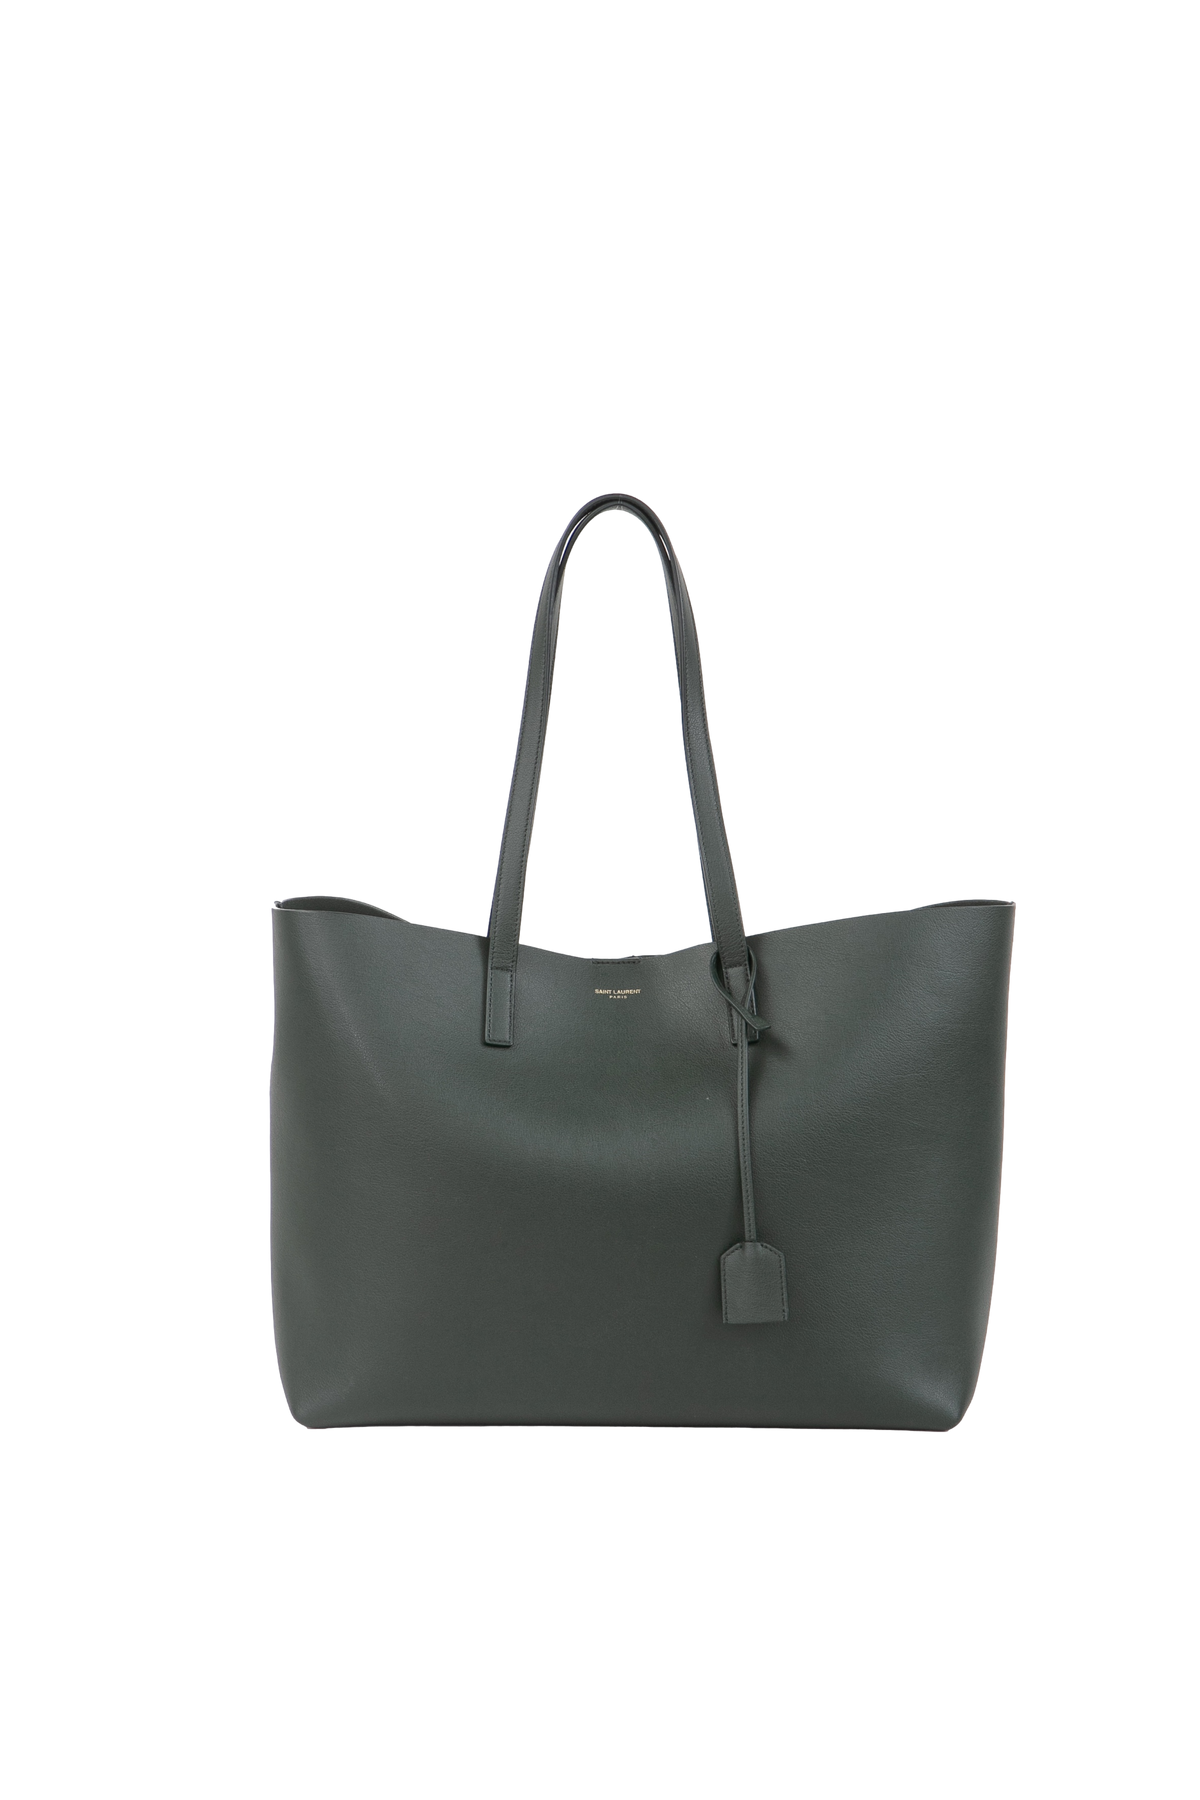 YSL SHOPPING TOTE GREEN OLIVE